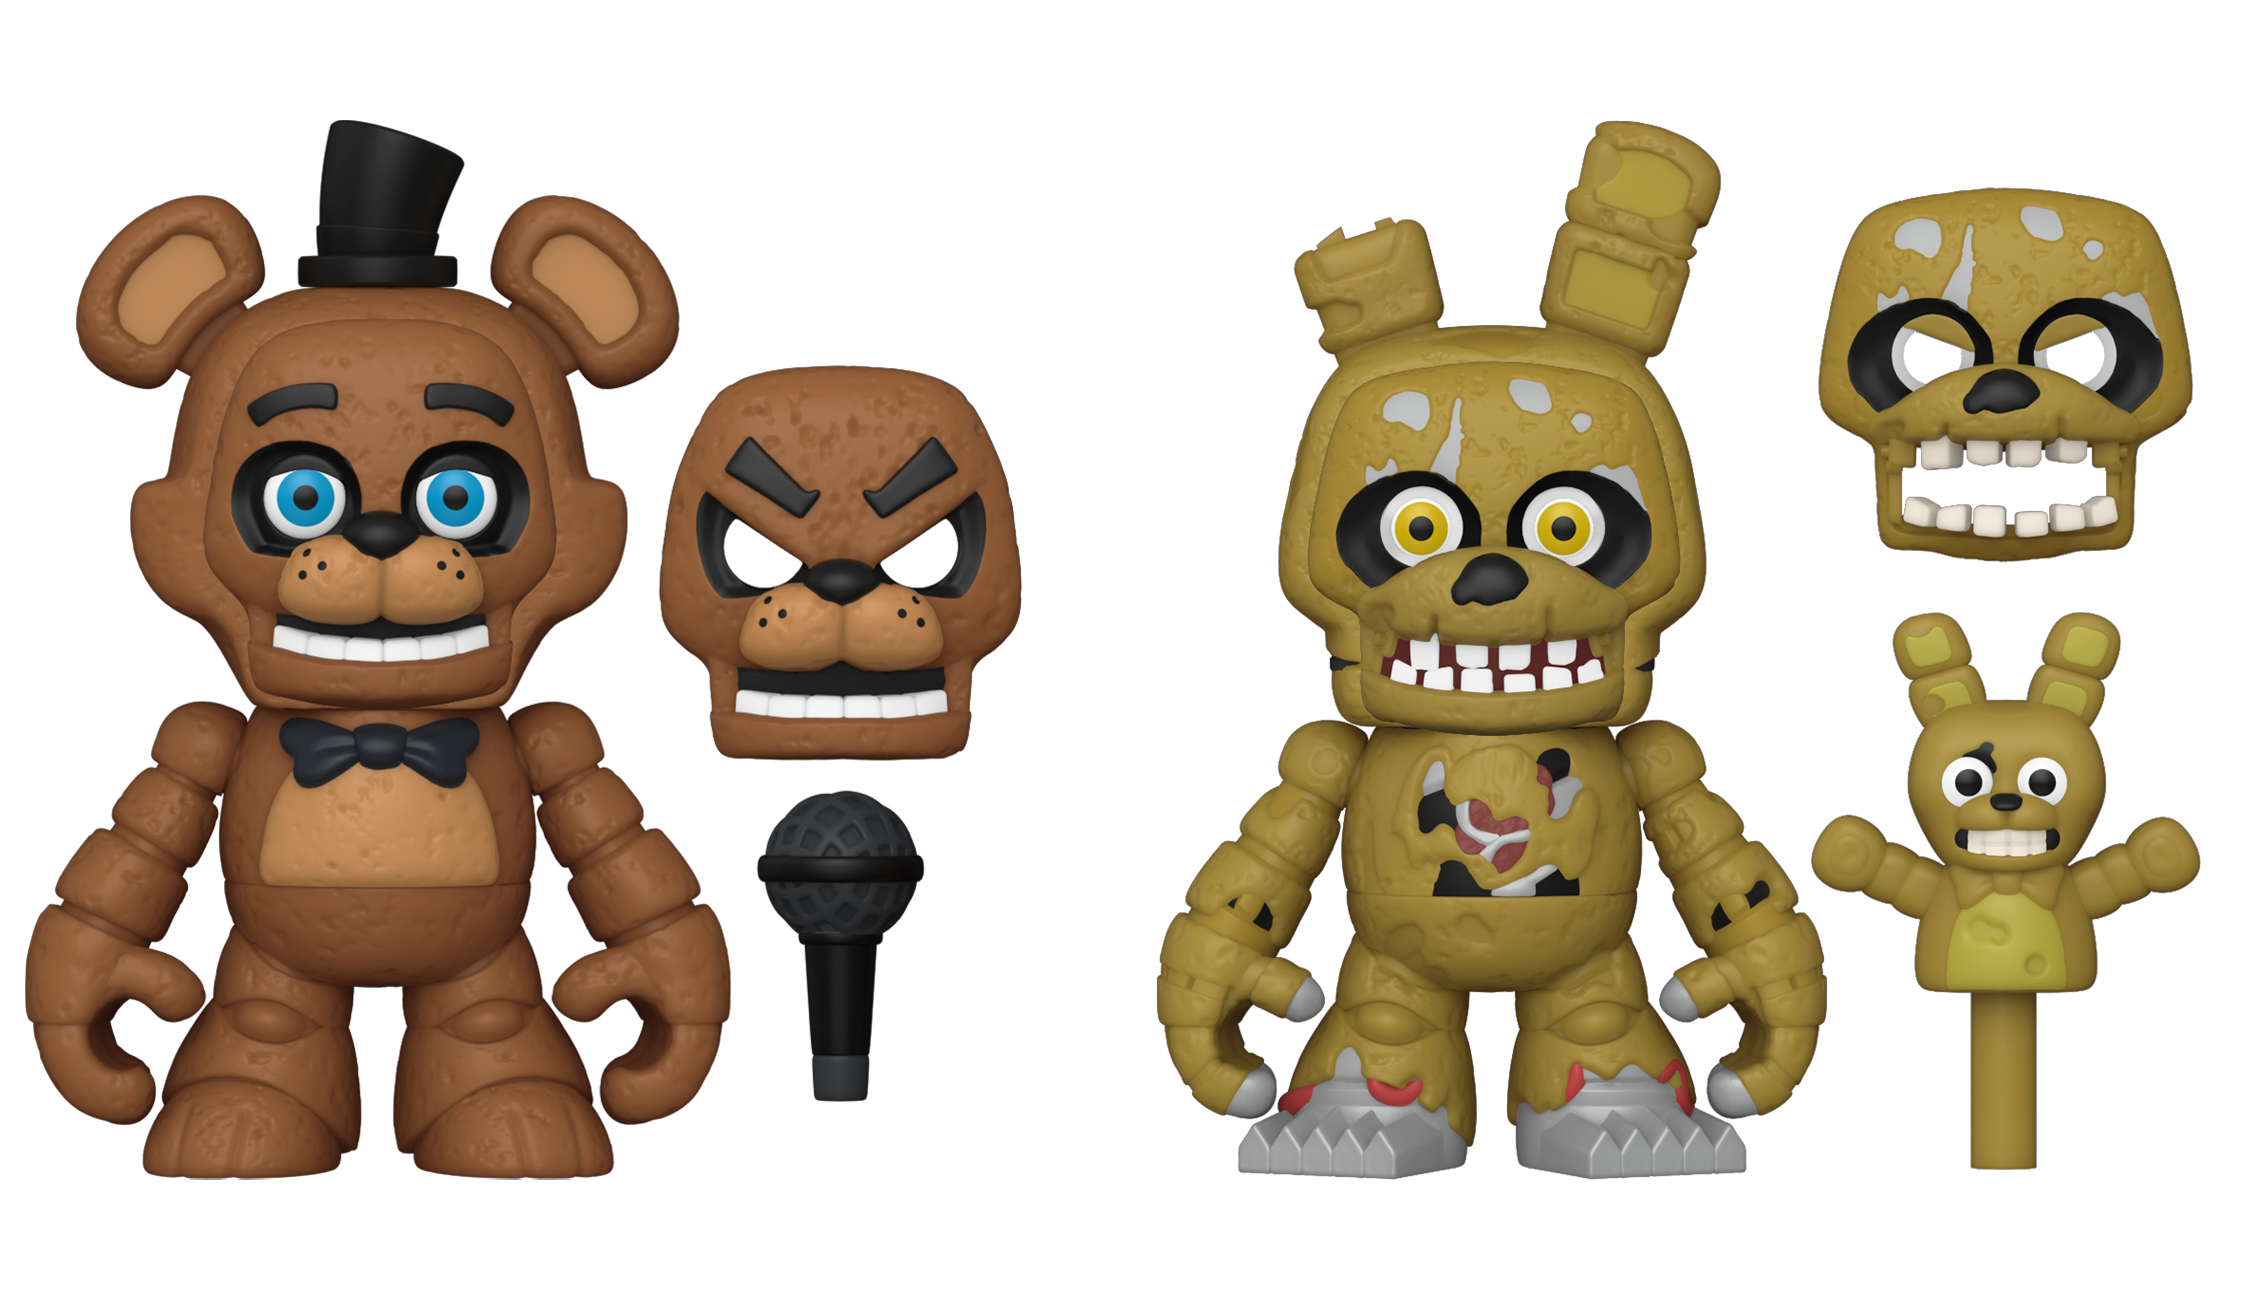  Funko Snaps!: Five Nights at Freddy's - Freddy and